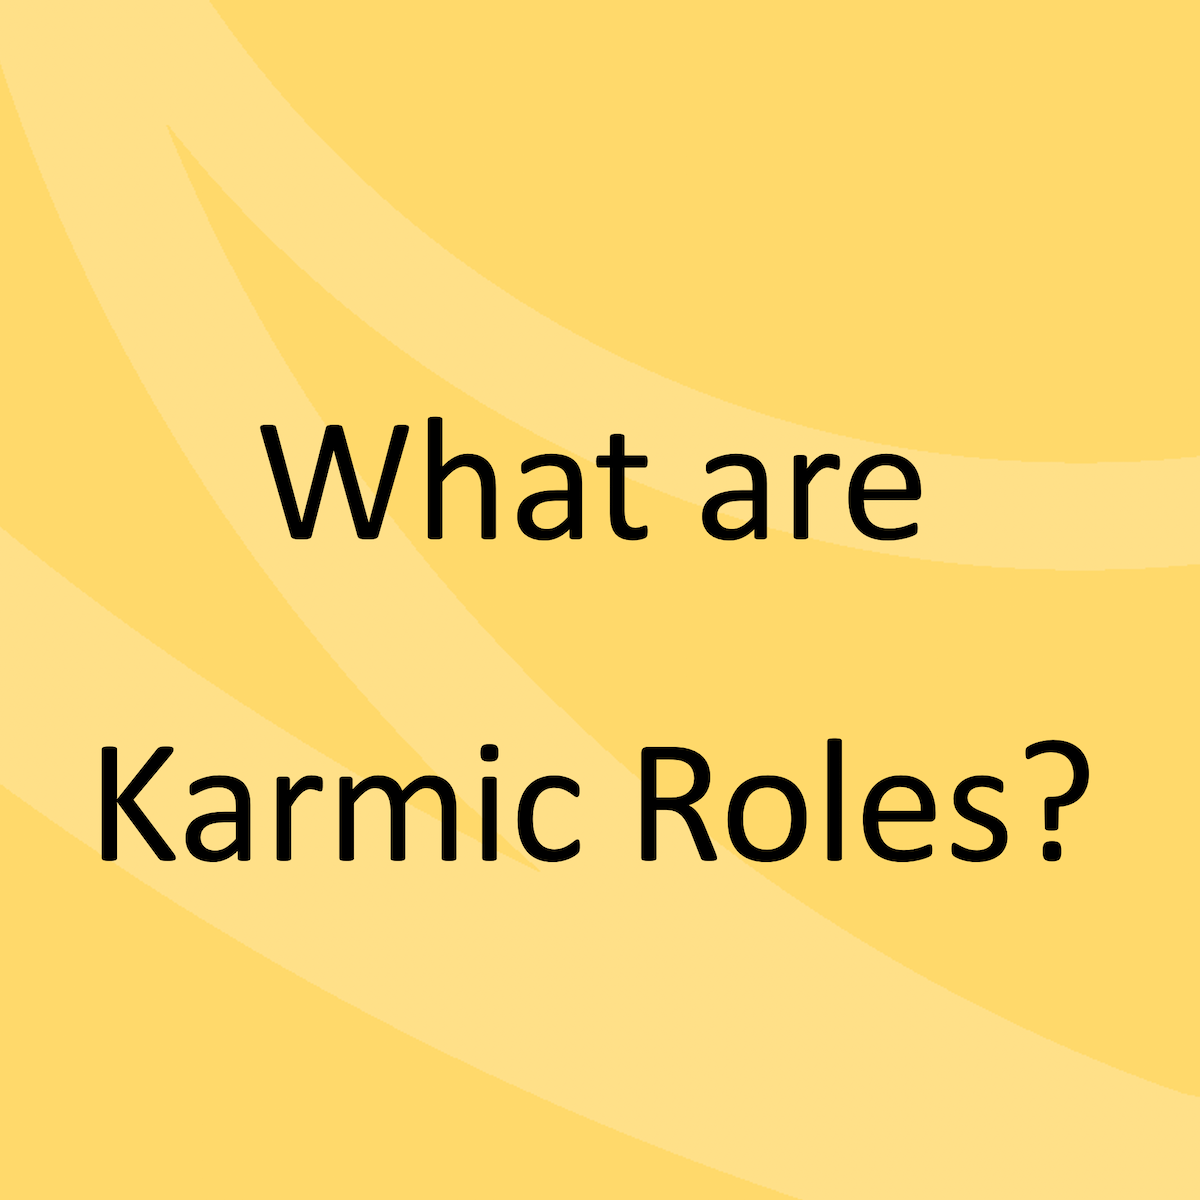 What are Karmic Roles?